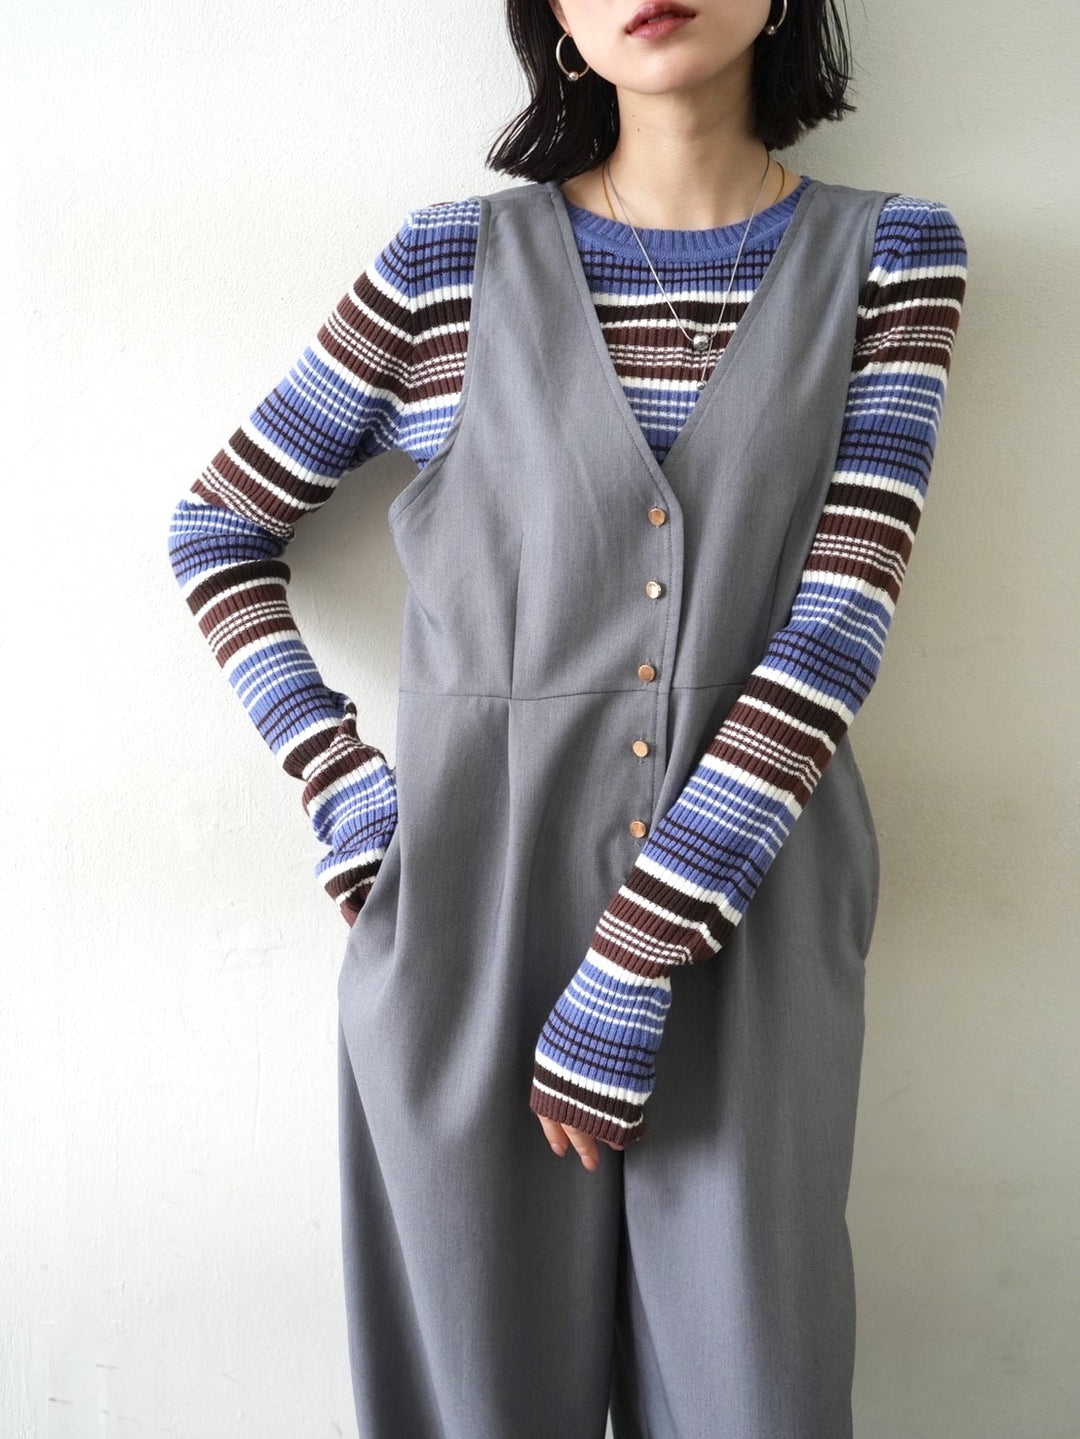 Finger hole rib knit top/blue brown